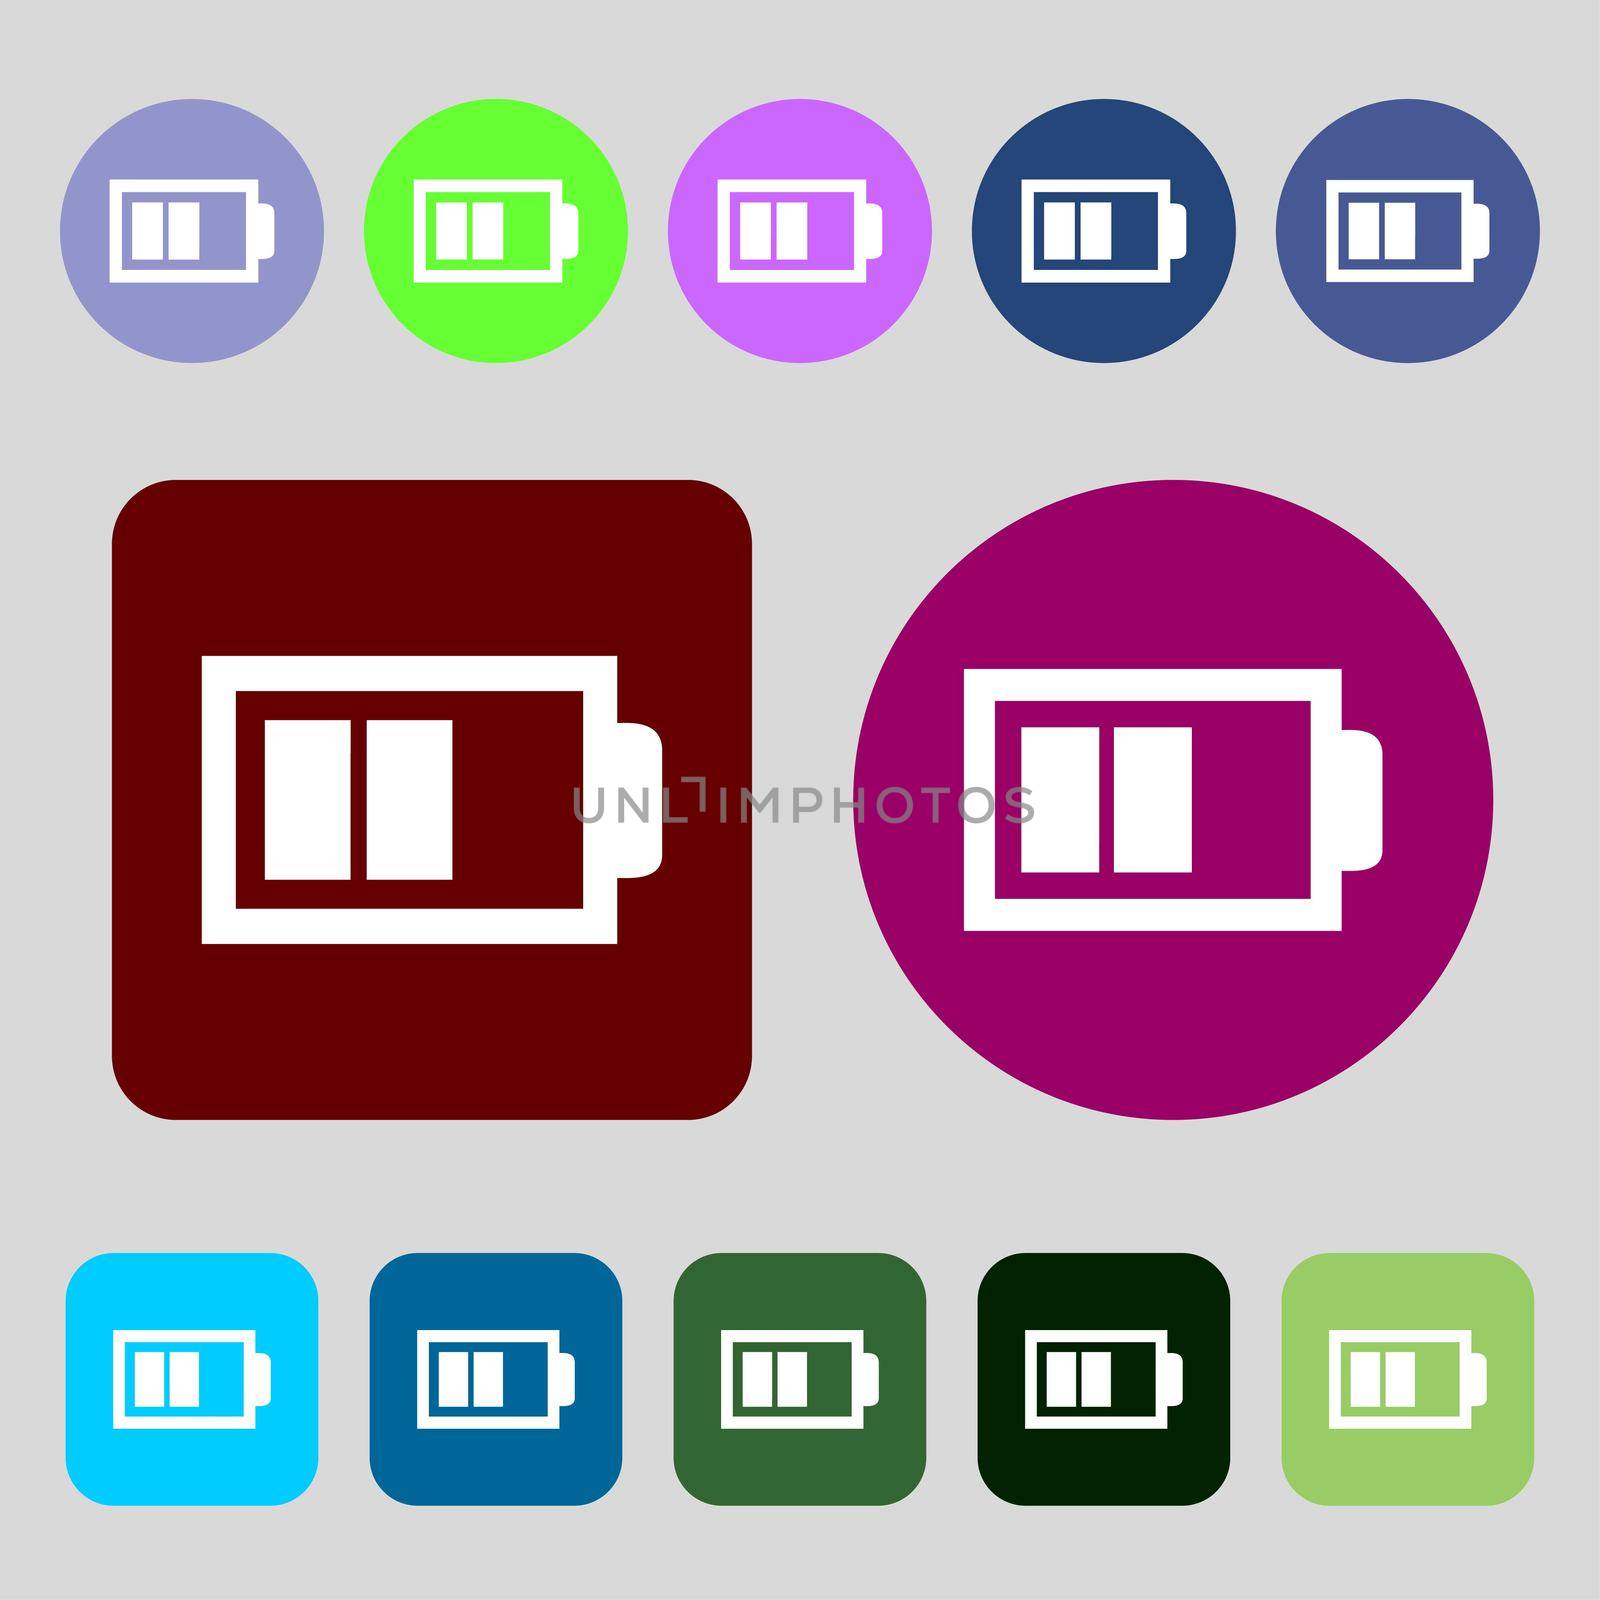 Battery half level sign icon. Low electricity symbol. 12 colored buttons. Flat design.  by serhii_lohvyniuk